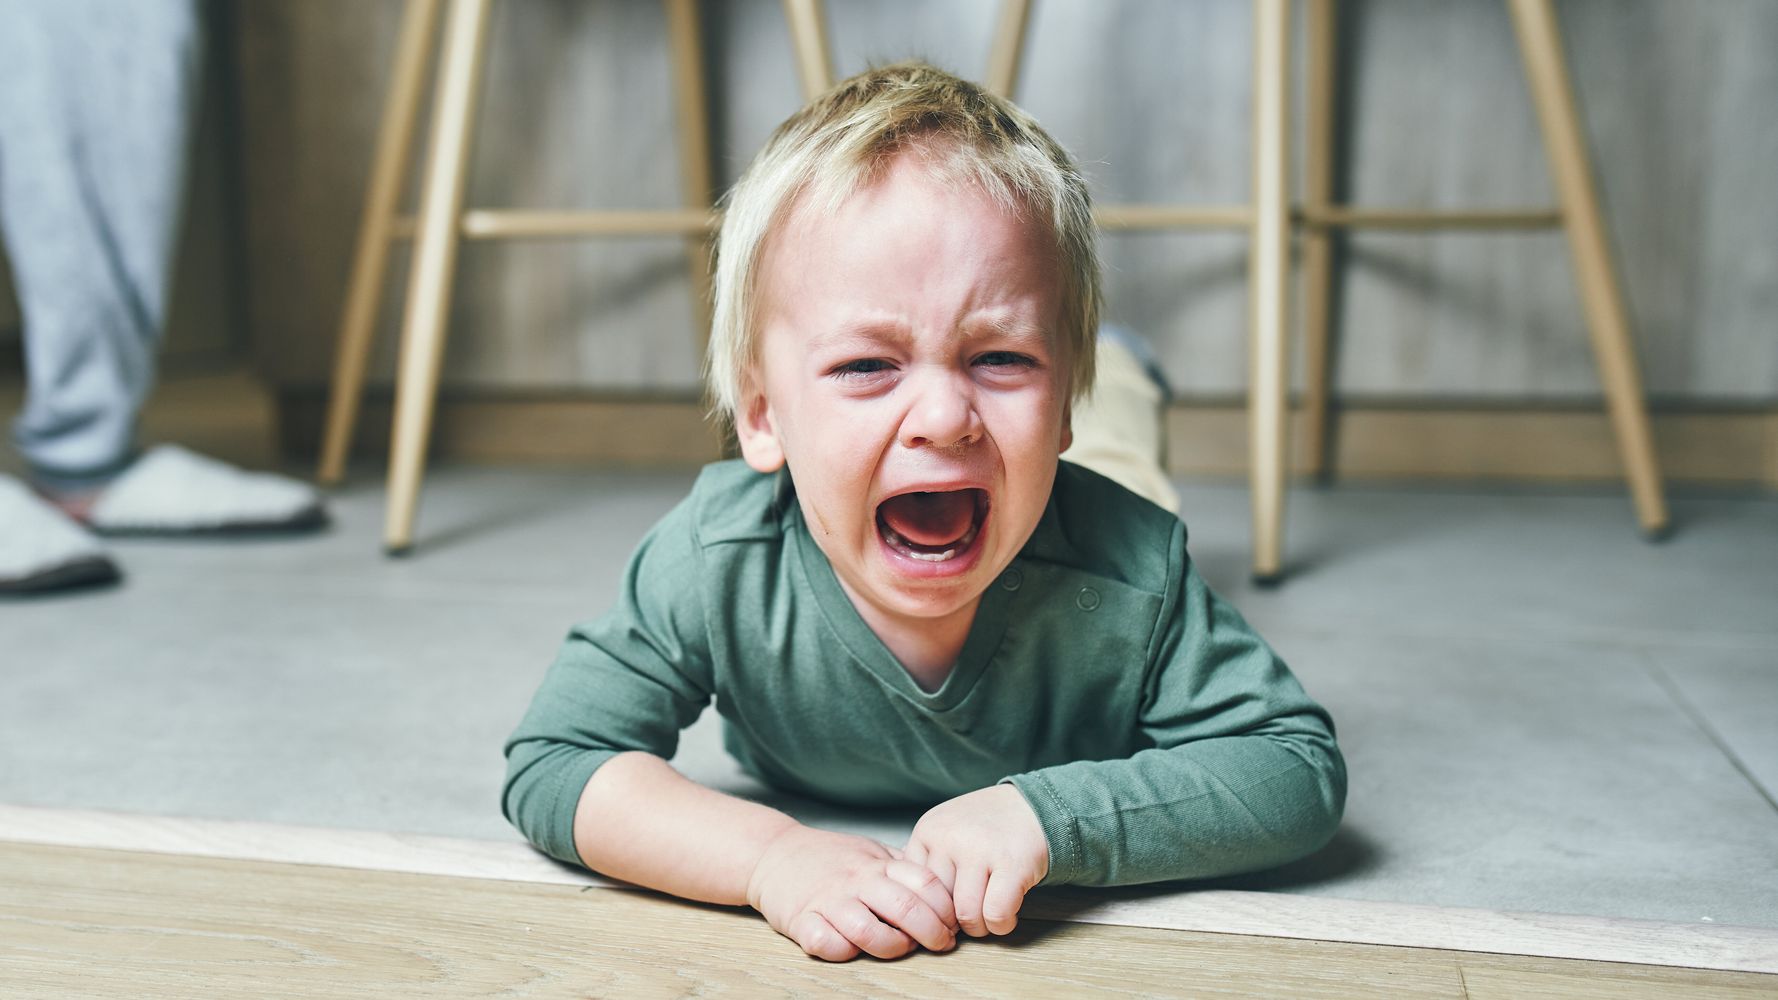 How to handle tantrums when they happen